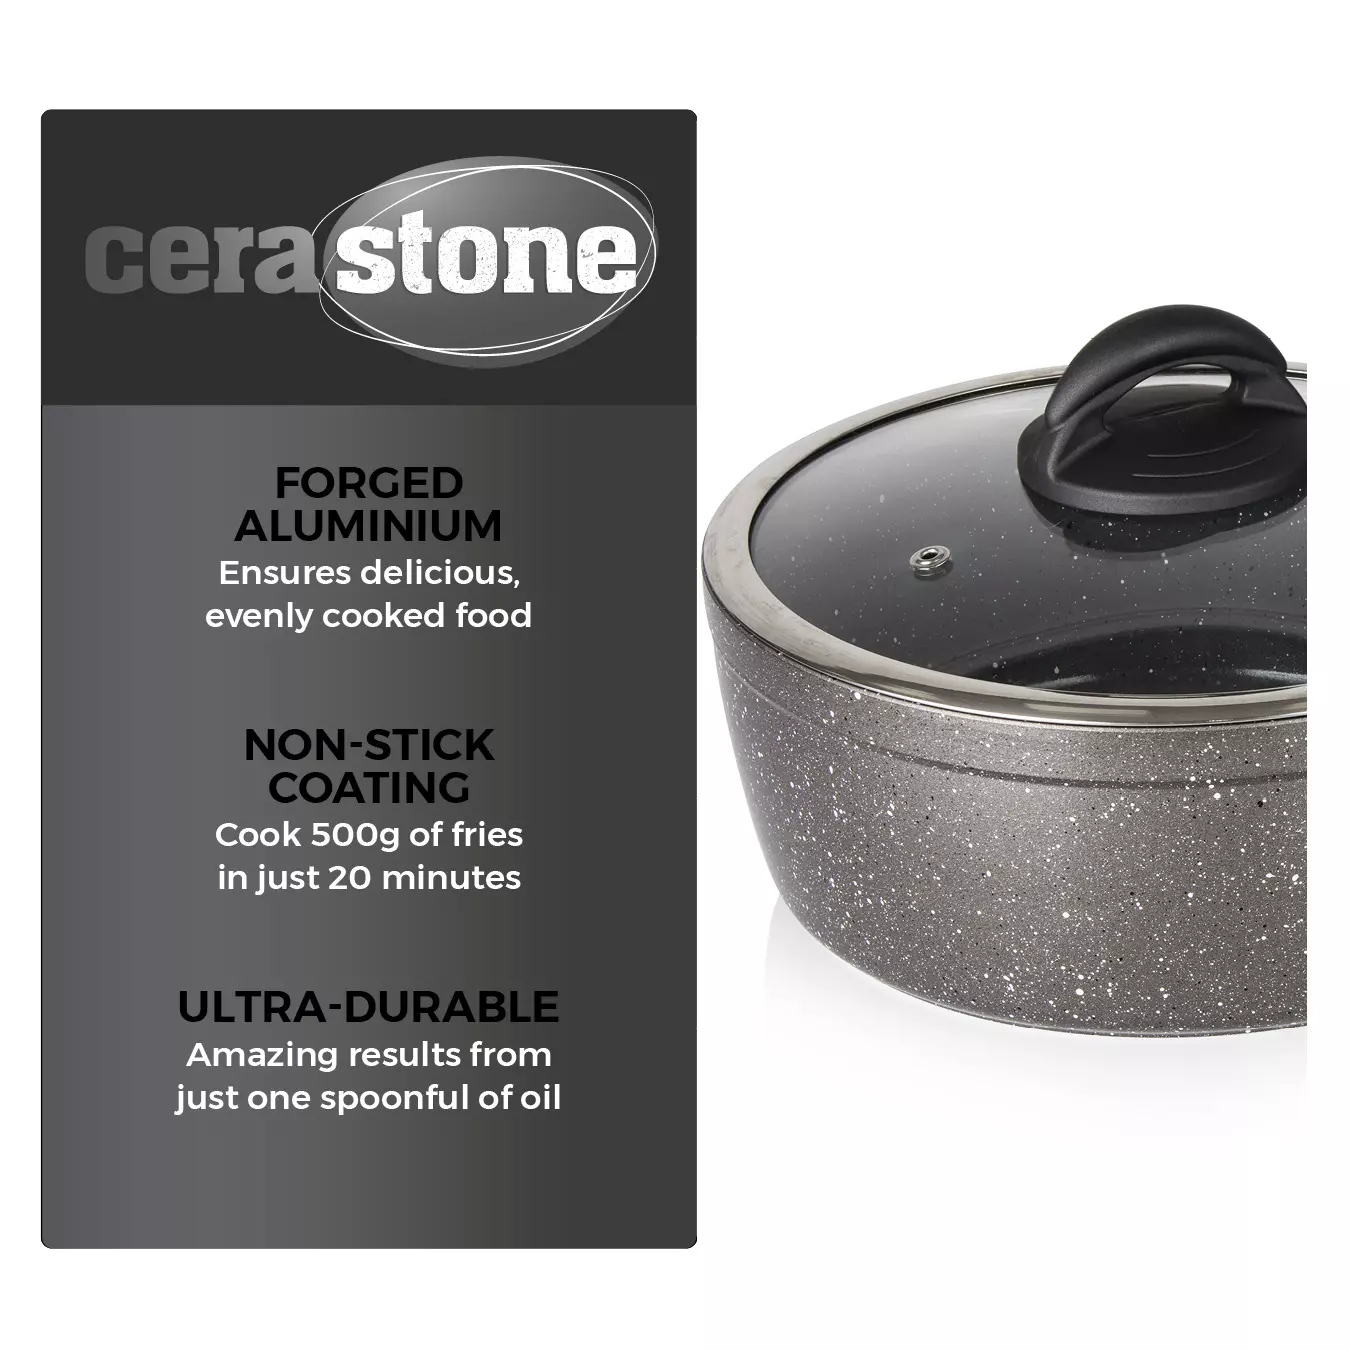  Tower Cerastone Induction Casserole Dish with Glass Lid, Non  Stick Ceramic Coating, Easy to Clean, Graphite, 24 cm: Home & Kitchen